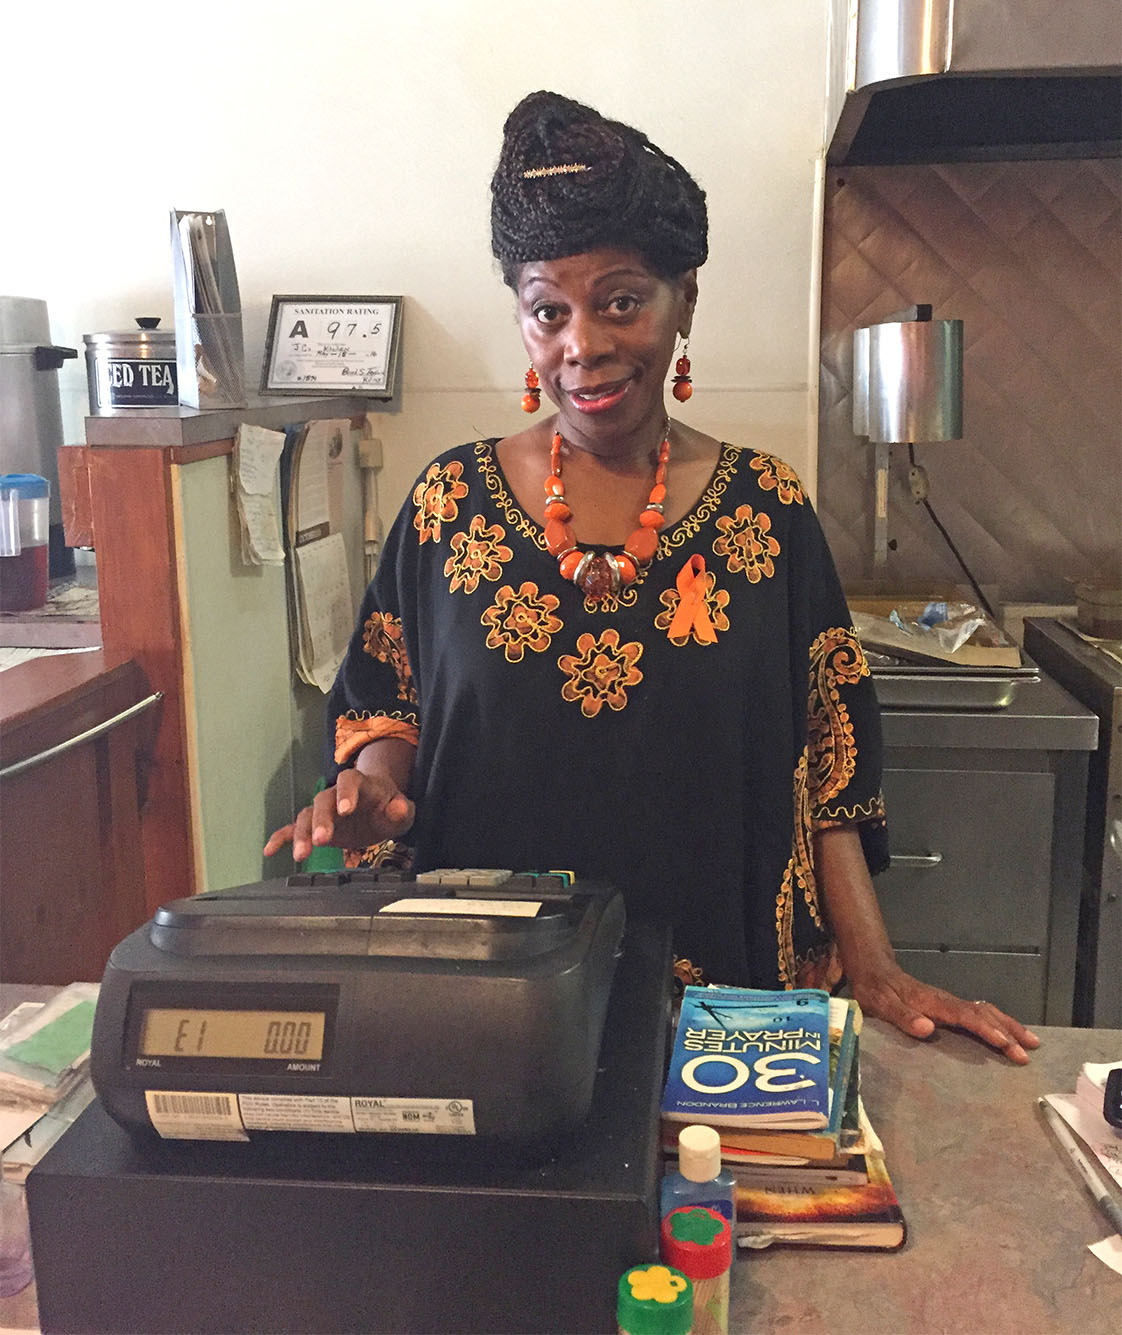 Phyllis Terry, the owner of JC’s Kitchen, works at the checkout desk where a pile of Christian books is placed. (Staff photo by Heng Su) 